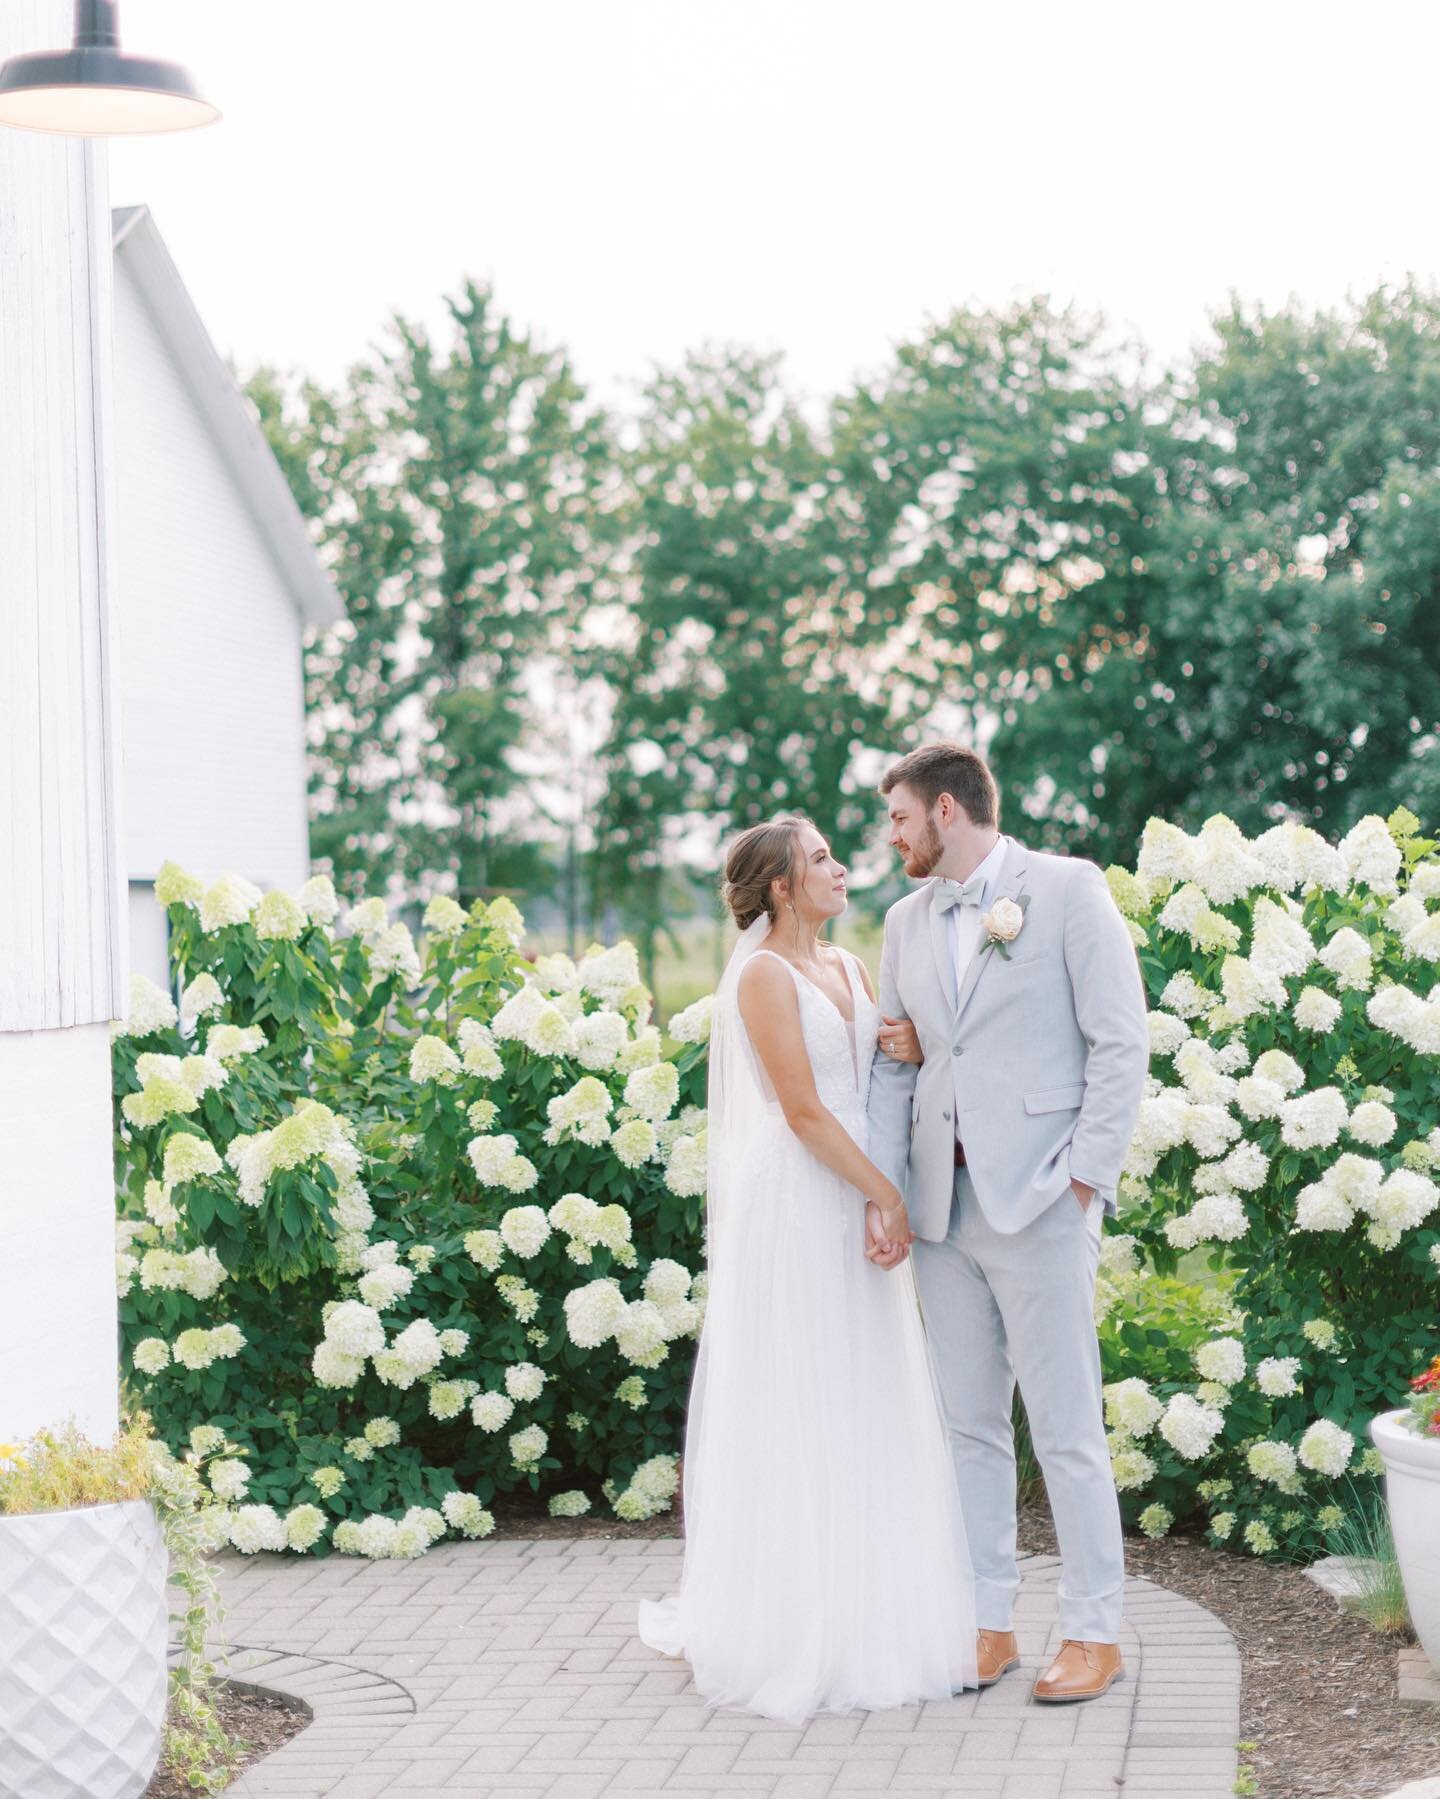 Just remember April showers bring May flowers! 🌸 We just love our hydrangeas and we know our couples and their photographers do too! Swipe to see them in all their glory 🥰&thinsp;
&thinsp;
#bluestemfarmandevents #barnwedding #realbarnwedding #illin